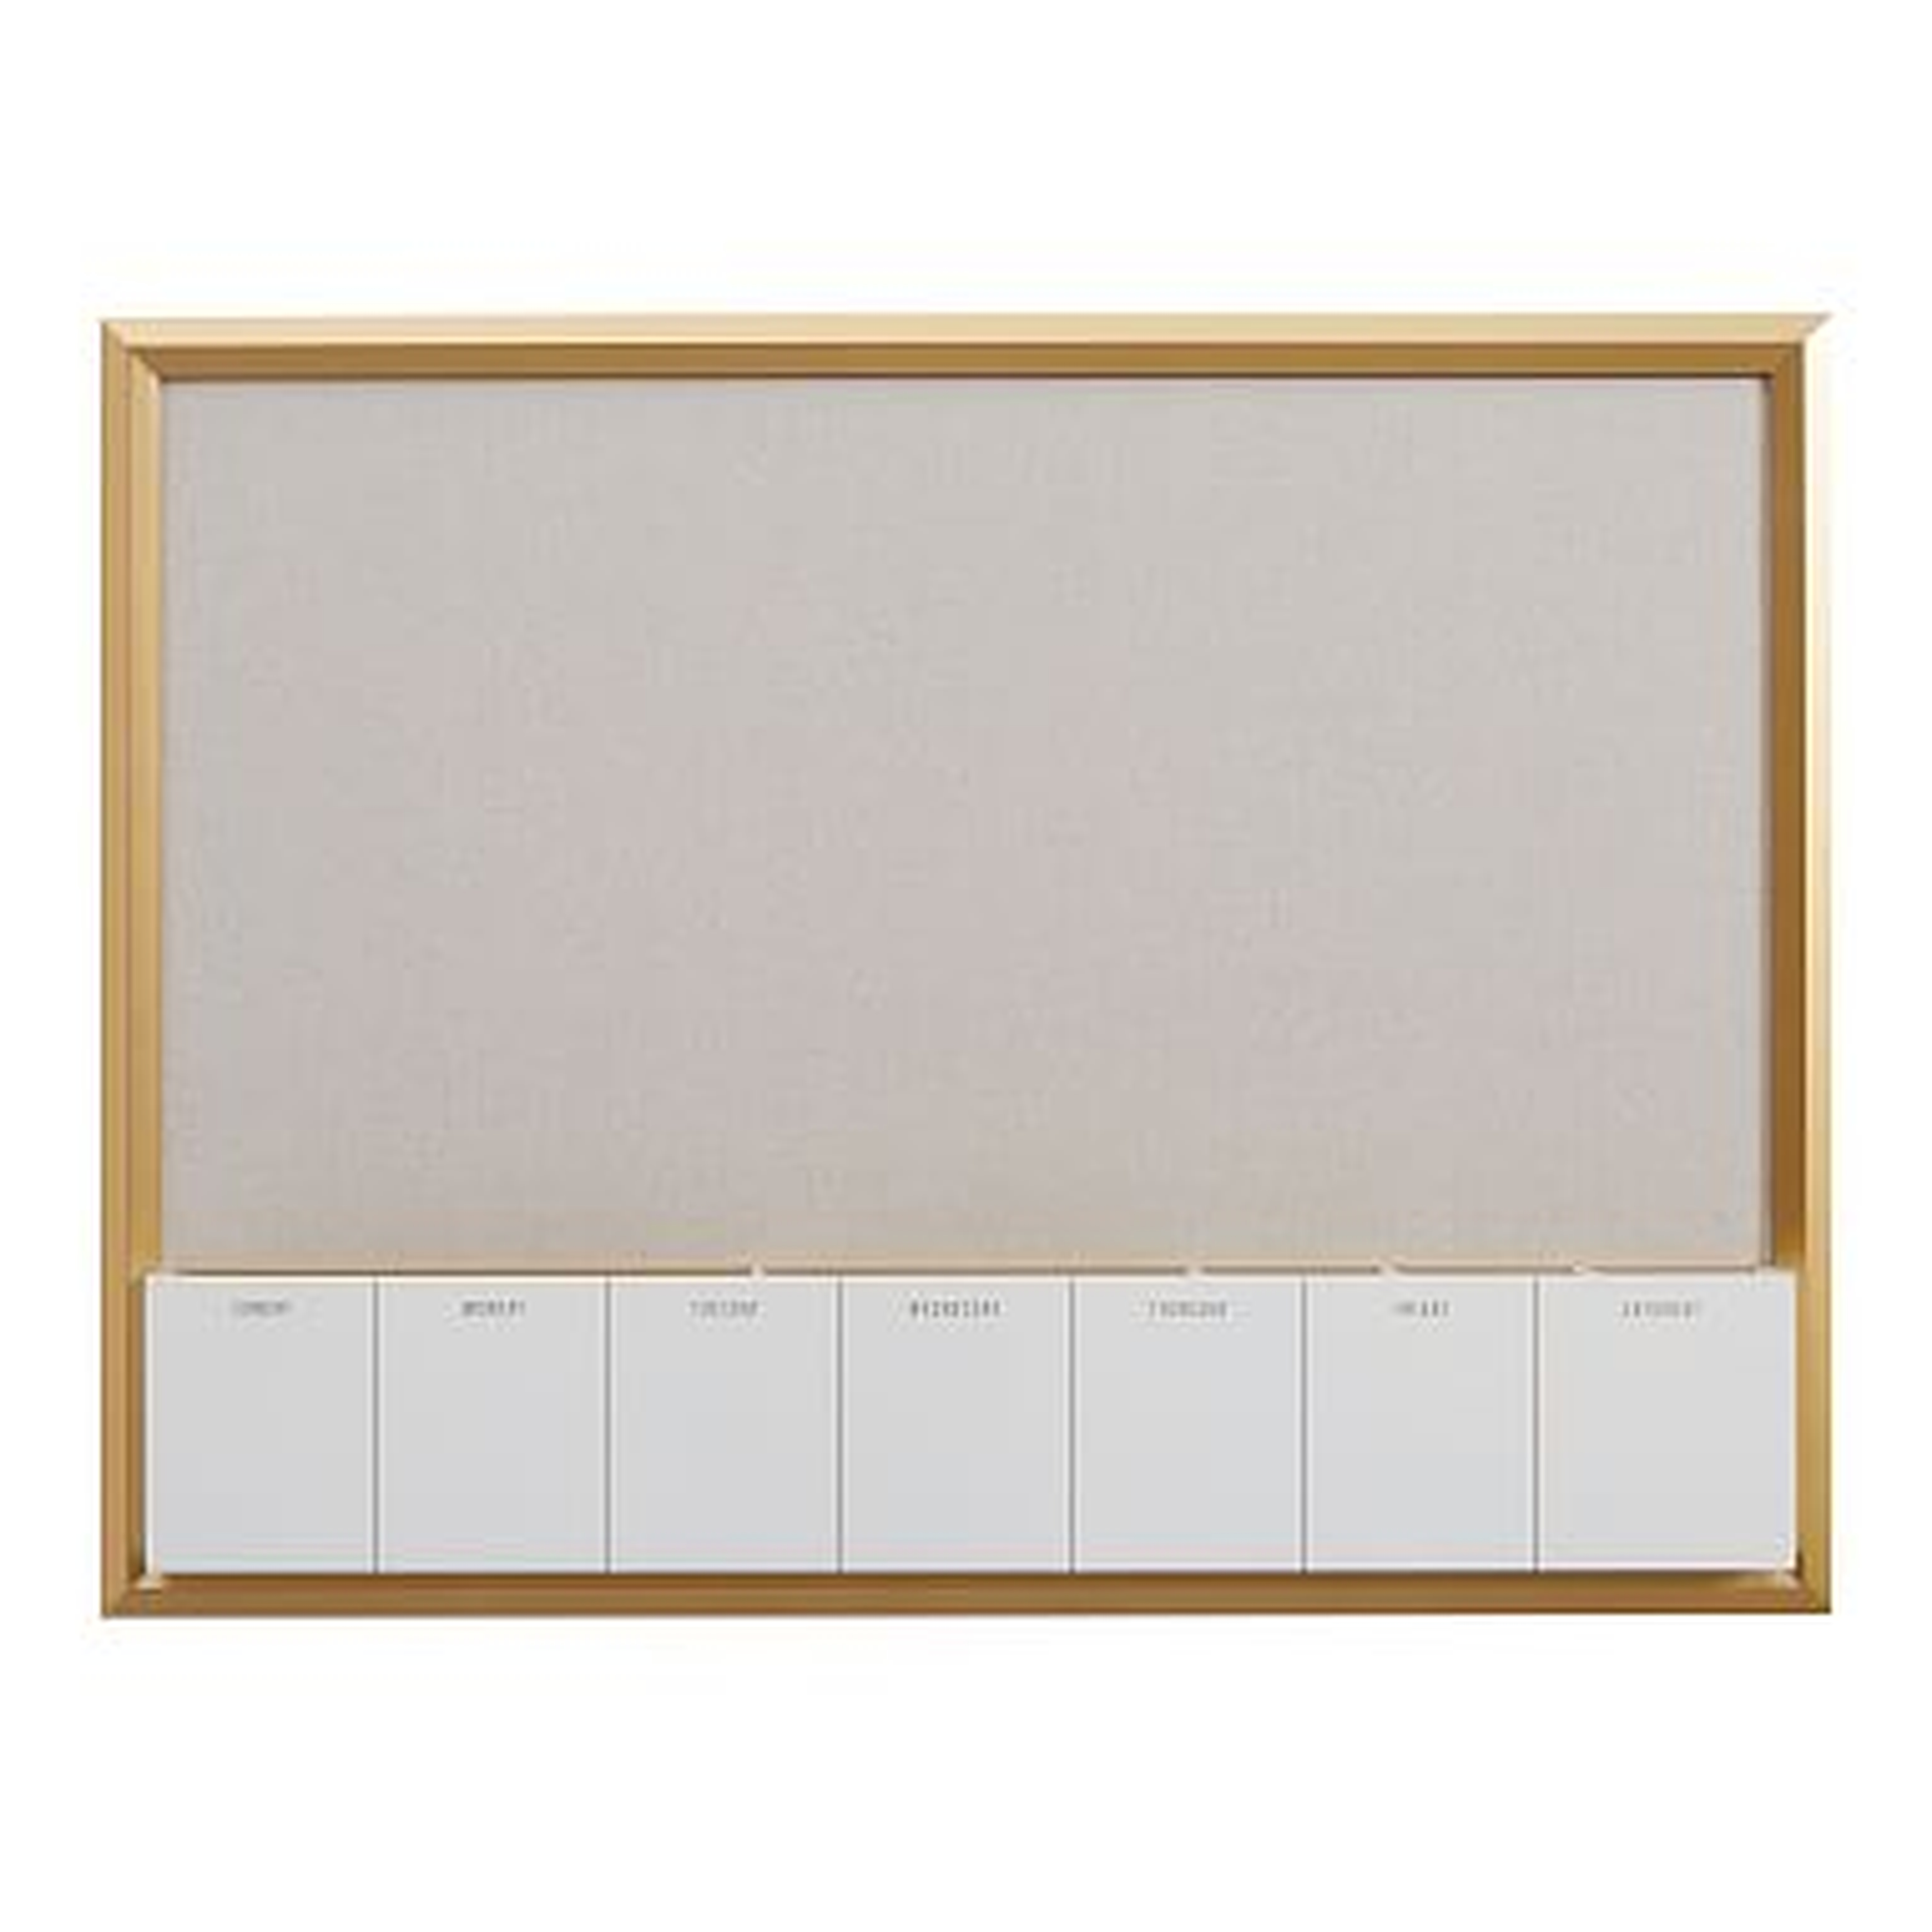 Pinboard With Dry Erase Calendar Cubby, Gold/Linen - Pottery Barn Teen